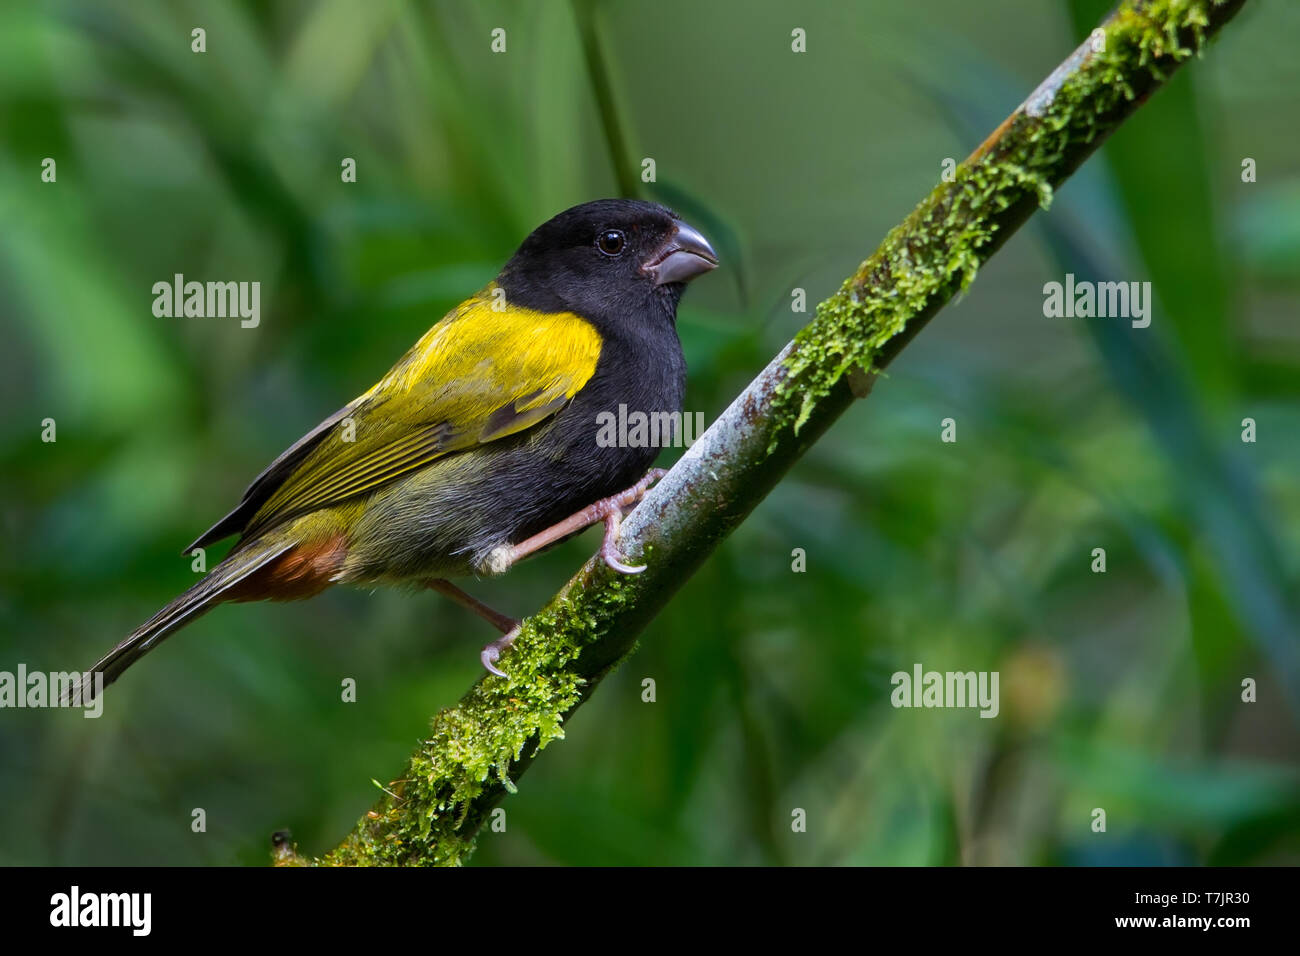 Yellow-shouldered Grassquit (Loxipasser anoxanthus) perched on a branch in the understory on the Caribbean island Jamaica. Stock Photo